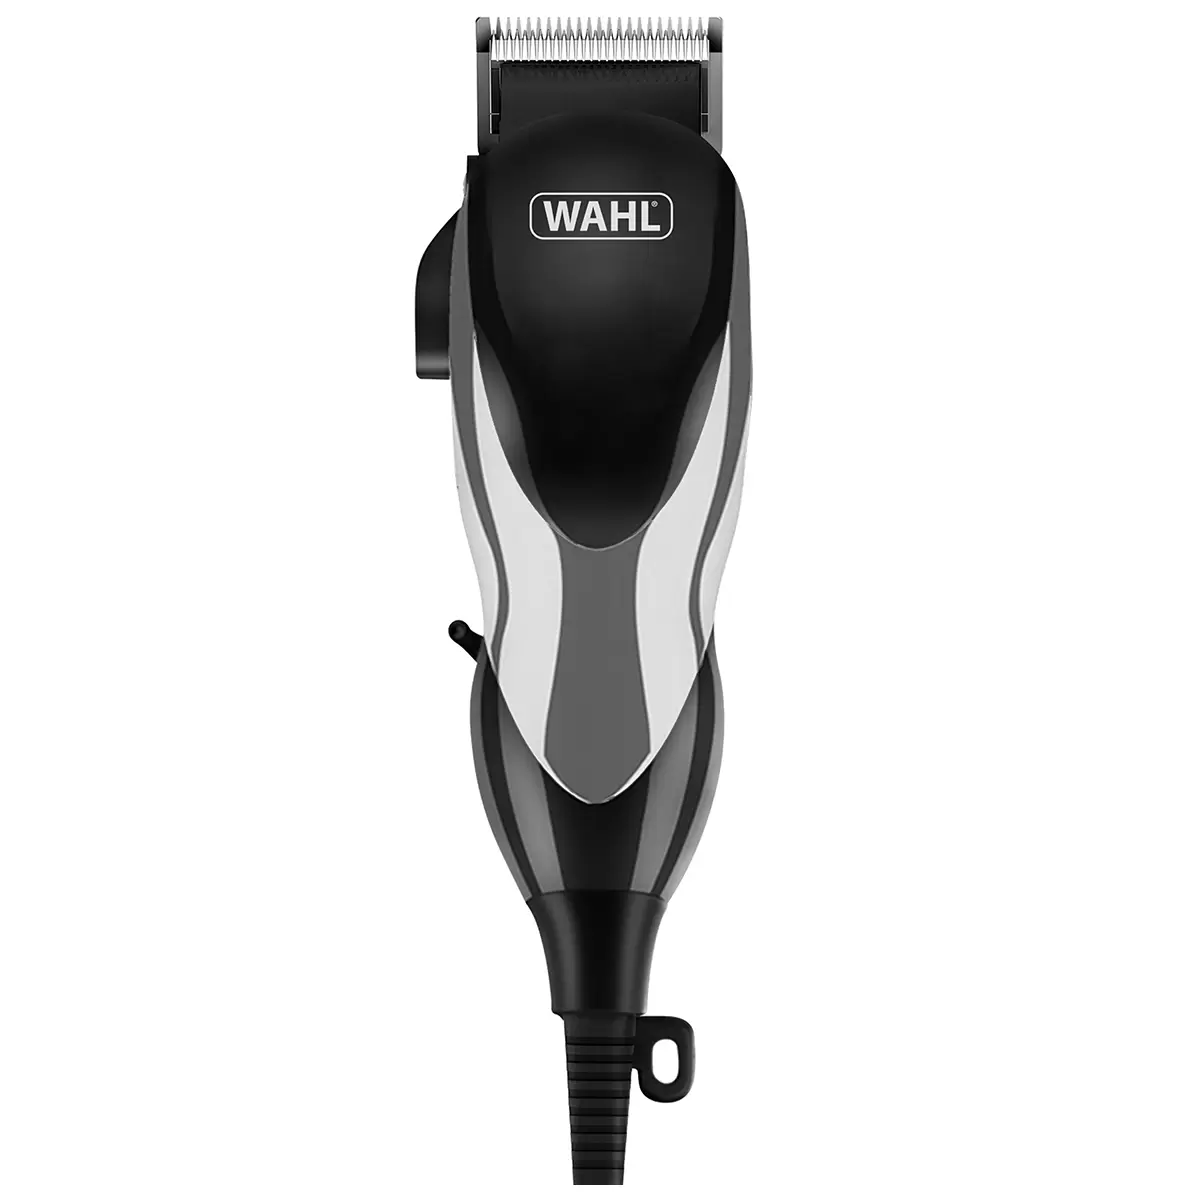 Wahl Haircutting Home Kit 30 Pieces 3026405